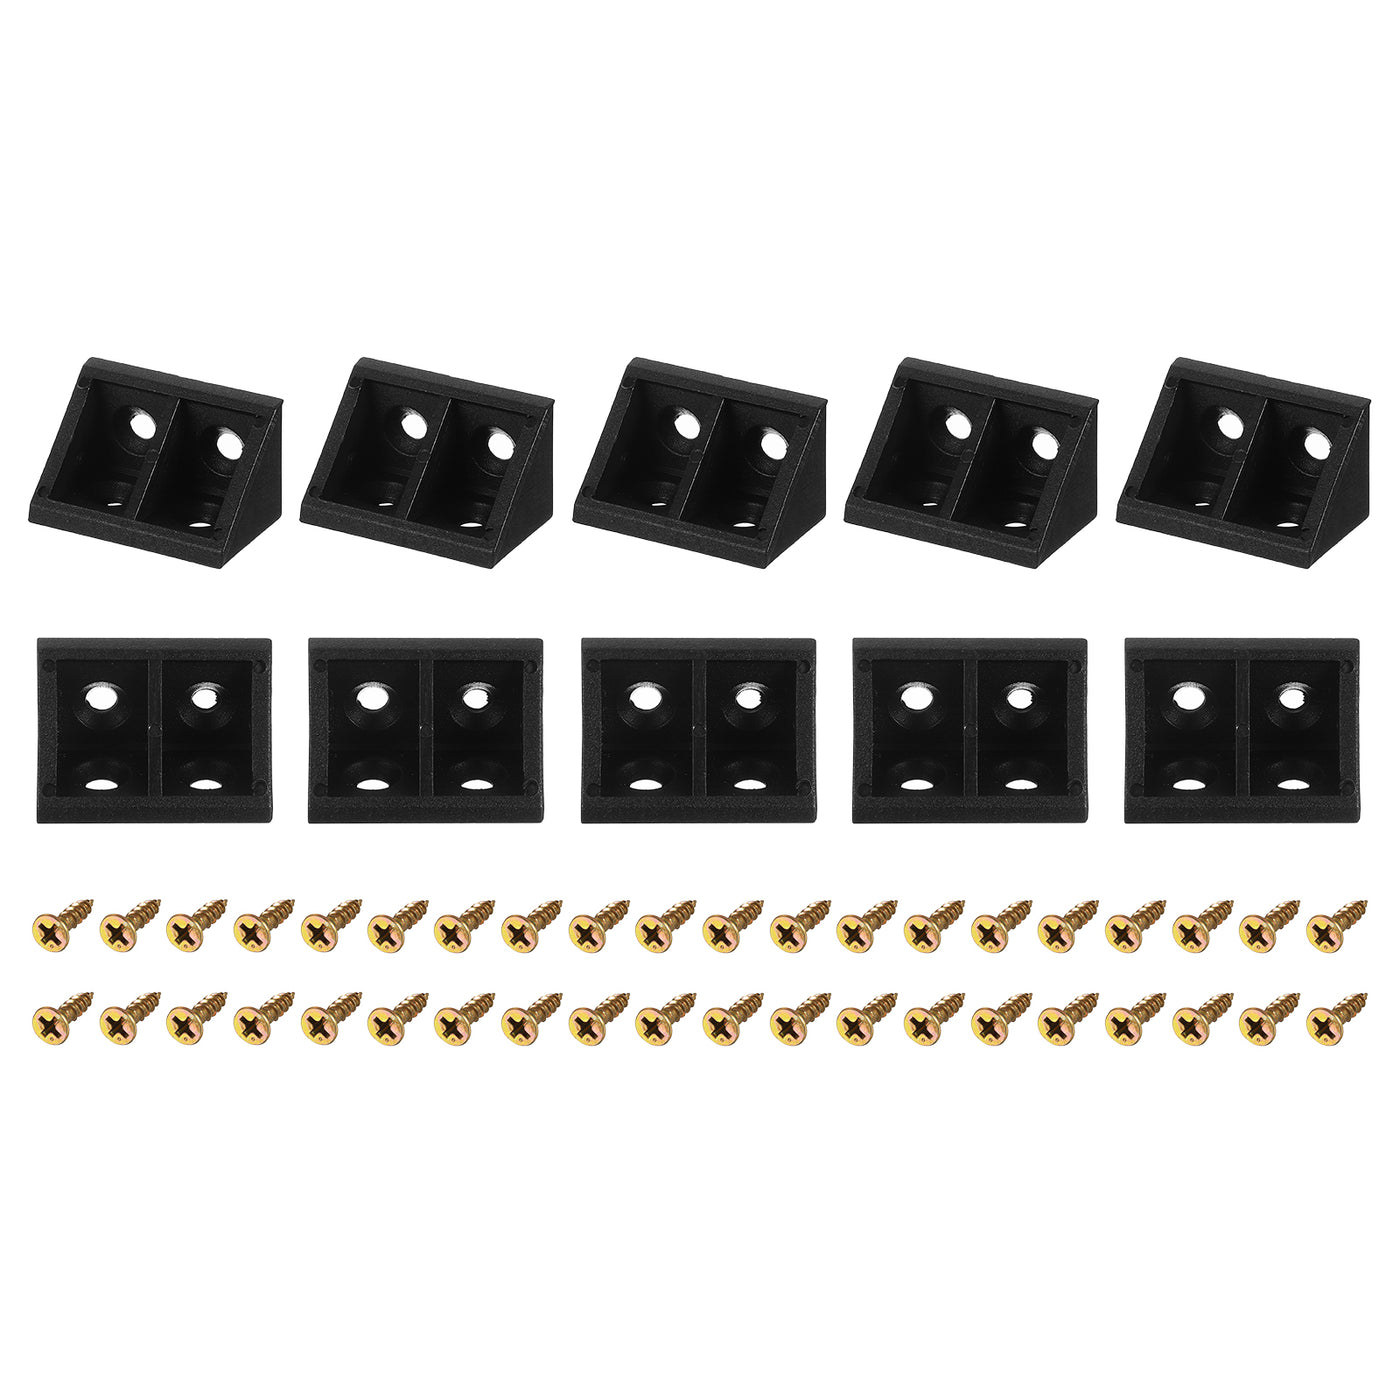 uxcell Uxcell 10Pcs 90 Degree Plastic Corner Braces, 33x19x19mm Nylon Shelf Right Angle Brackets with Screws for Cabinets, Cupboards (Black)